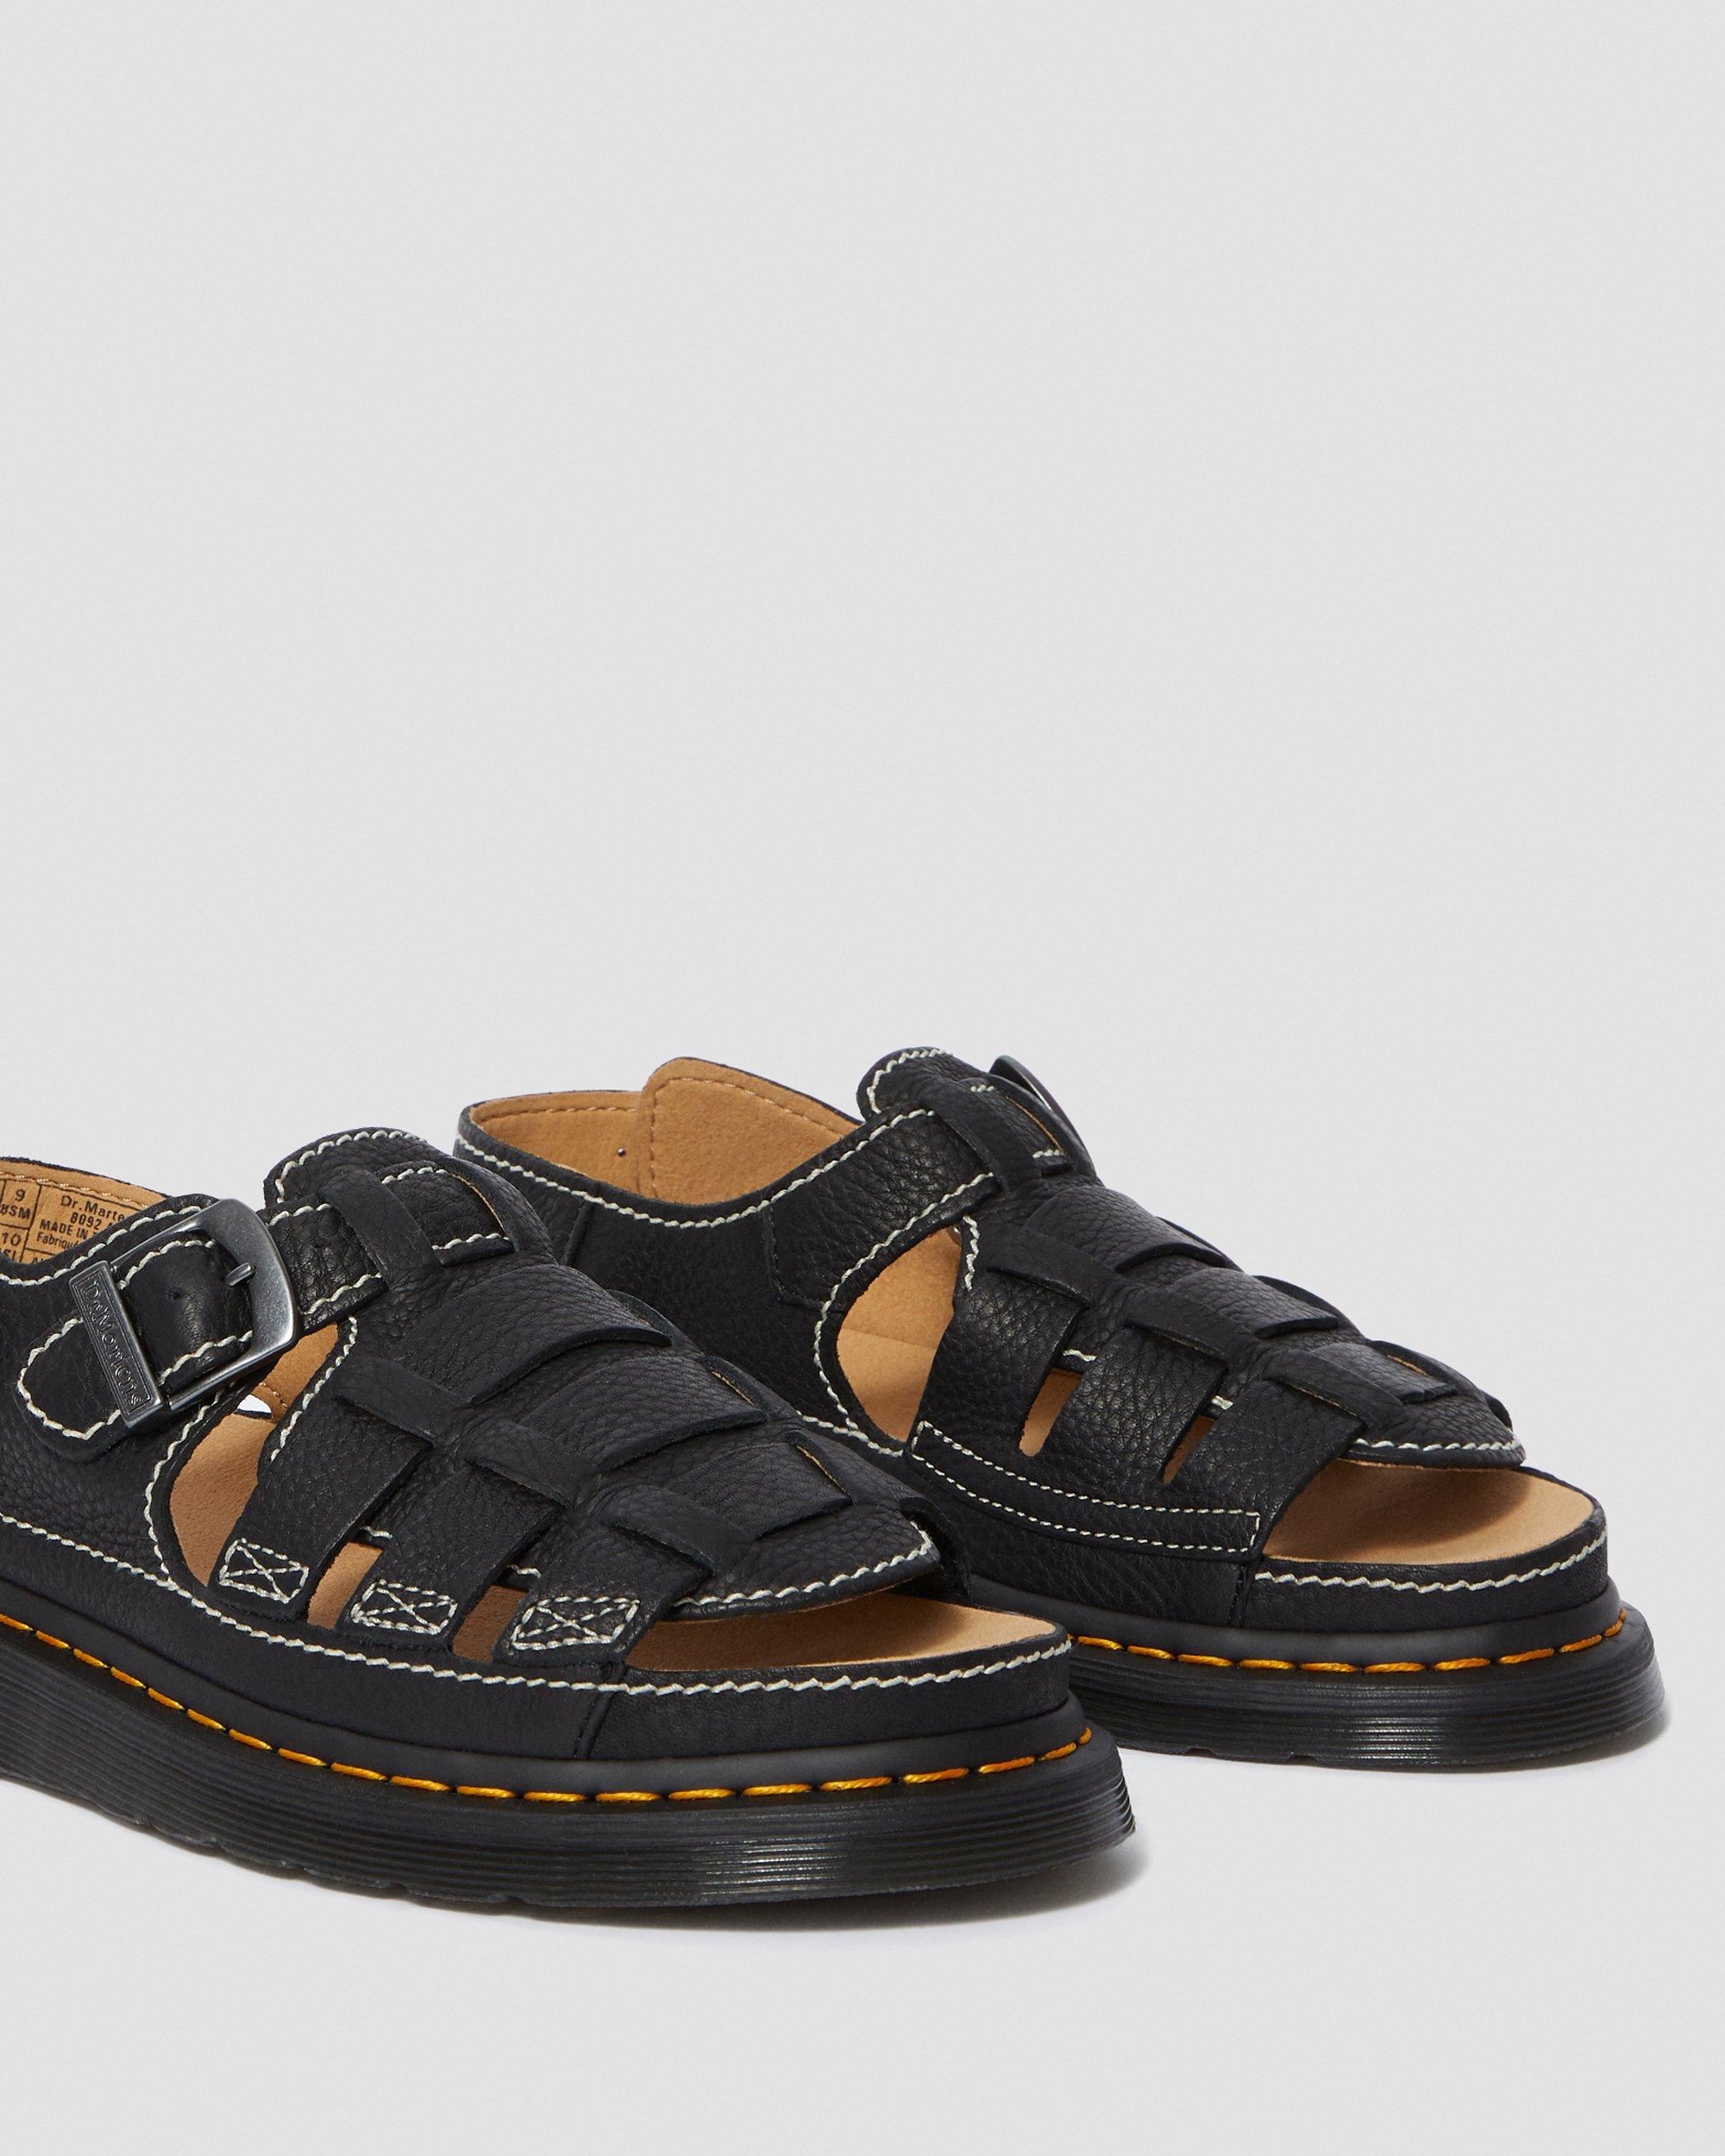 womens leather fisherman sandals